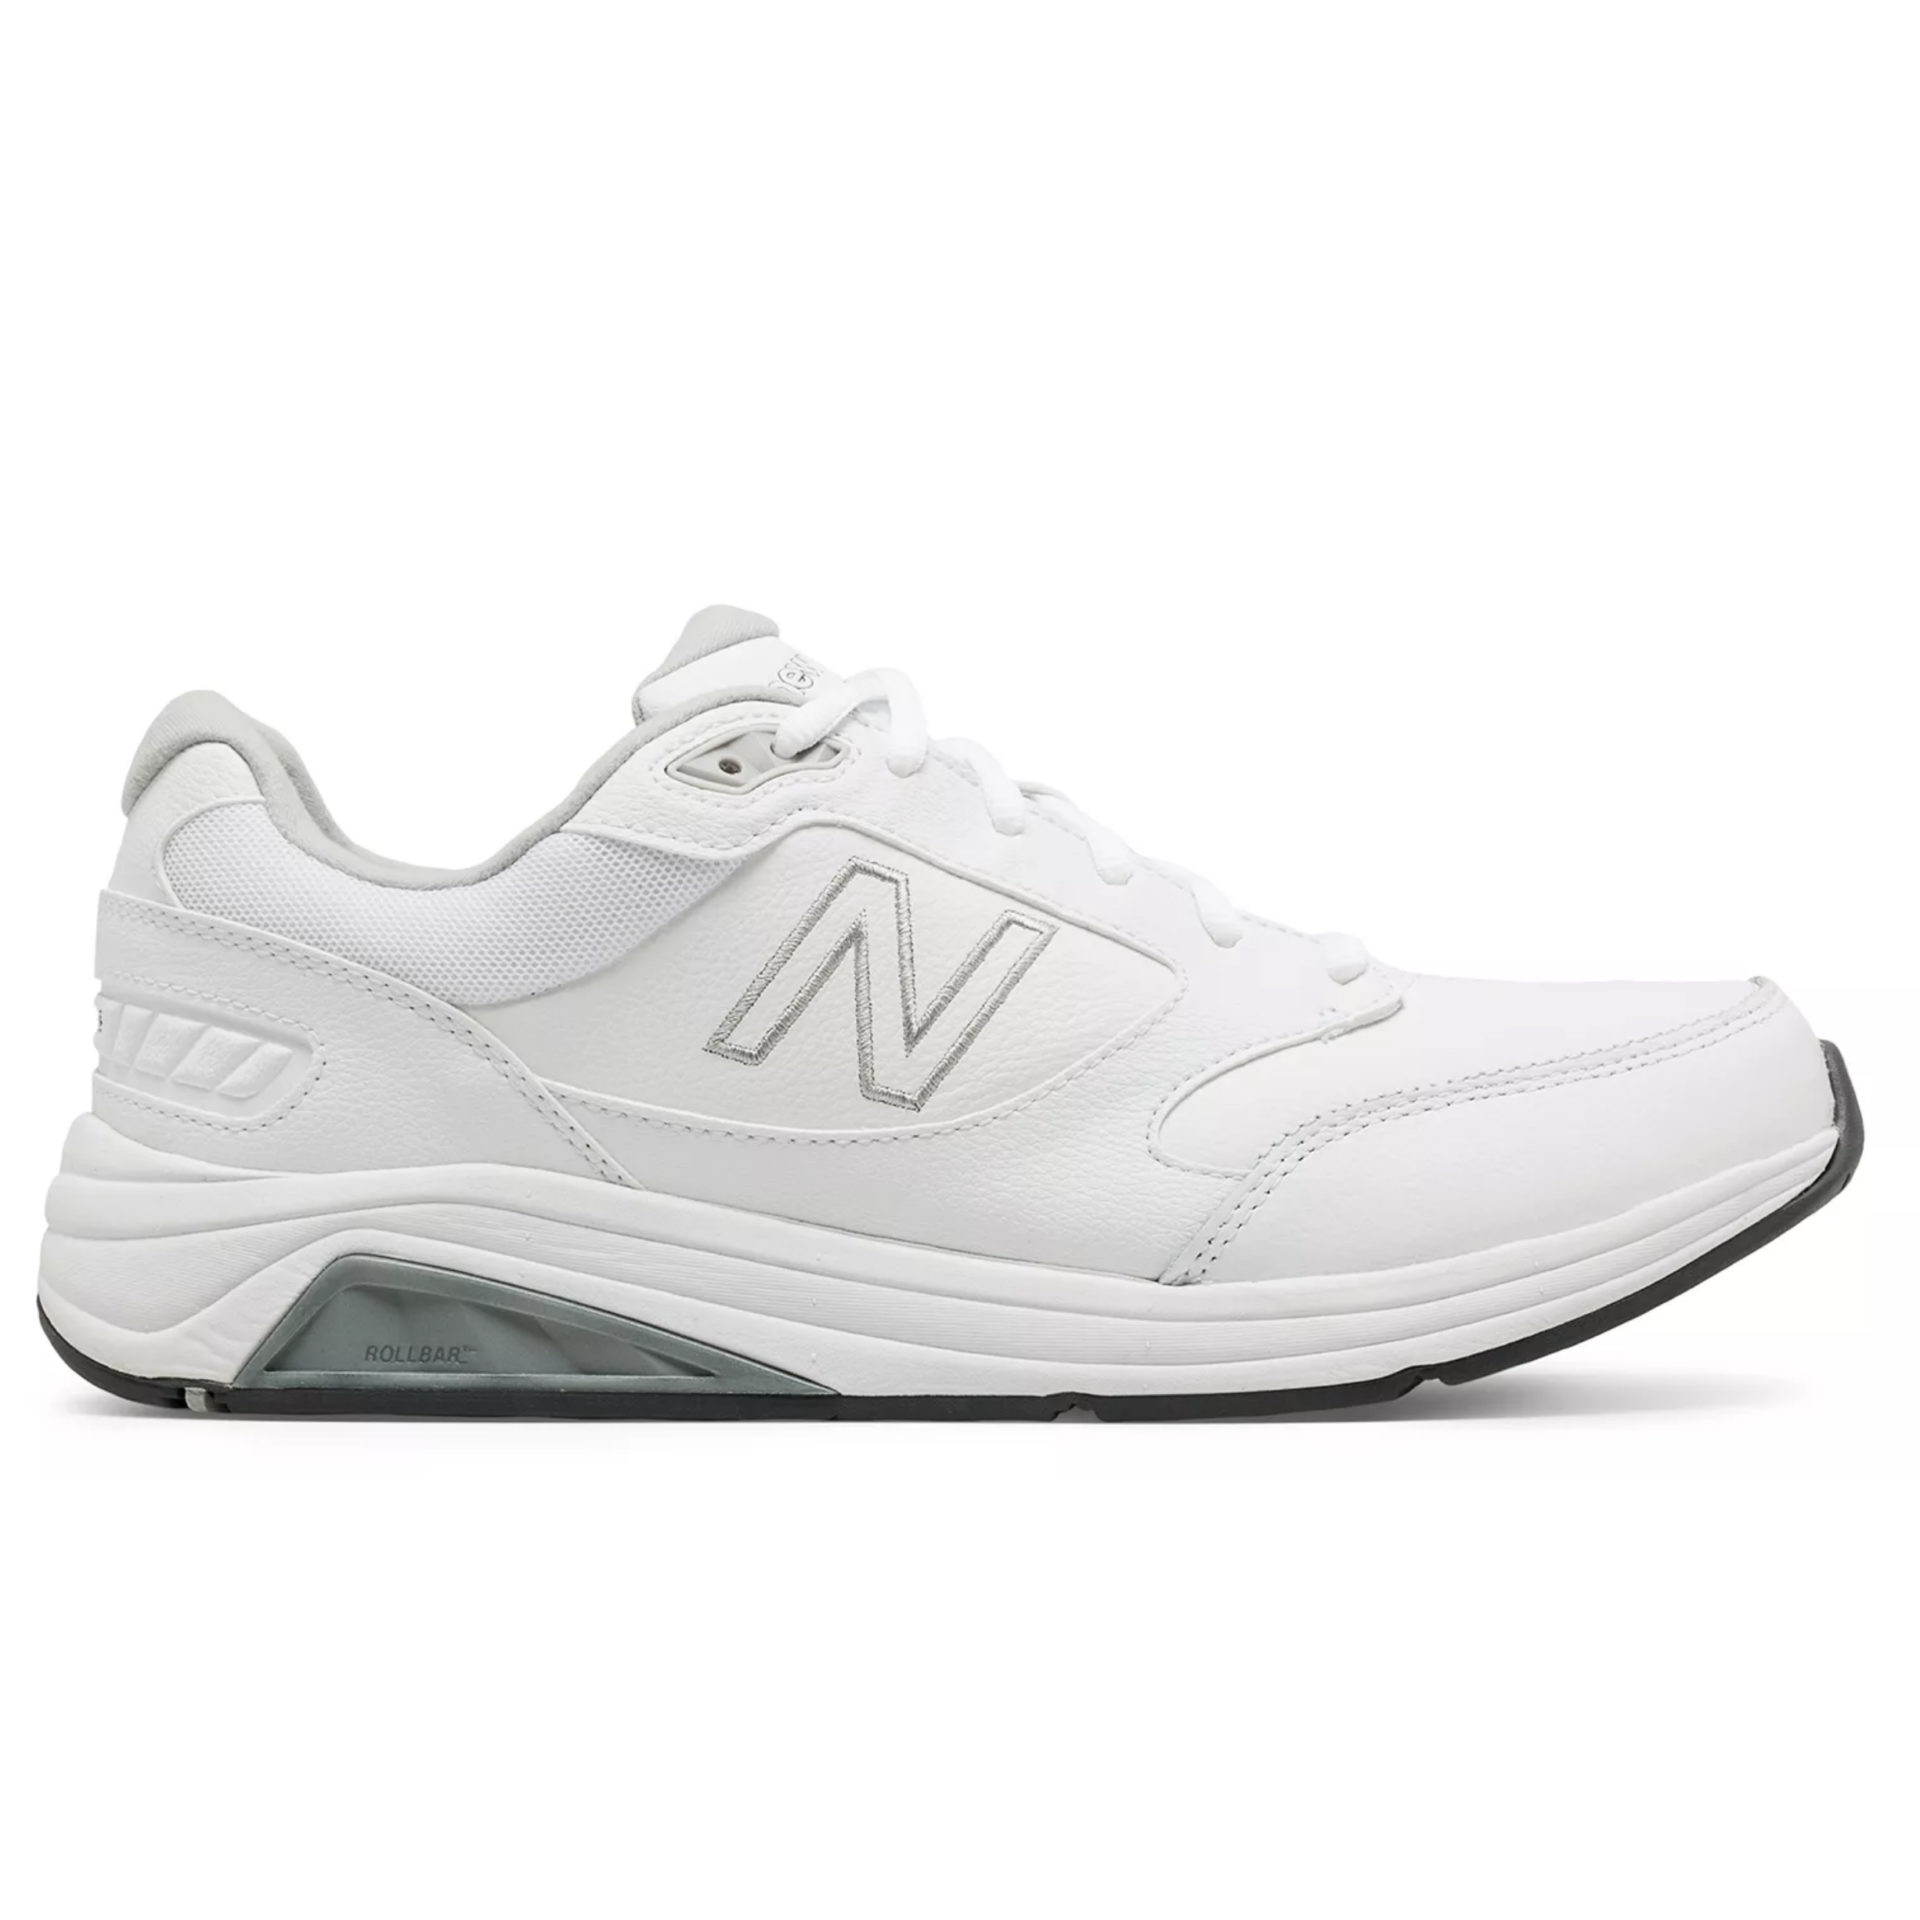 new balance rollbar shoes - 53% OFF 